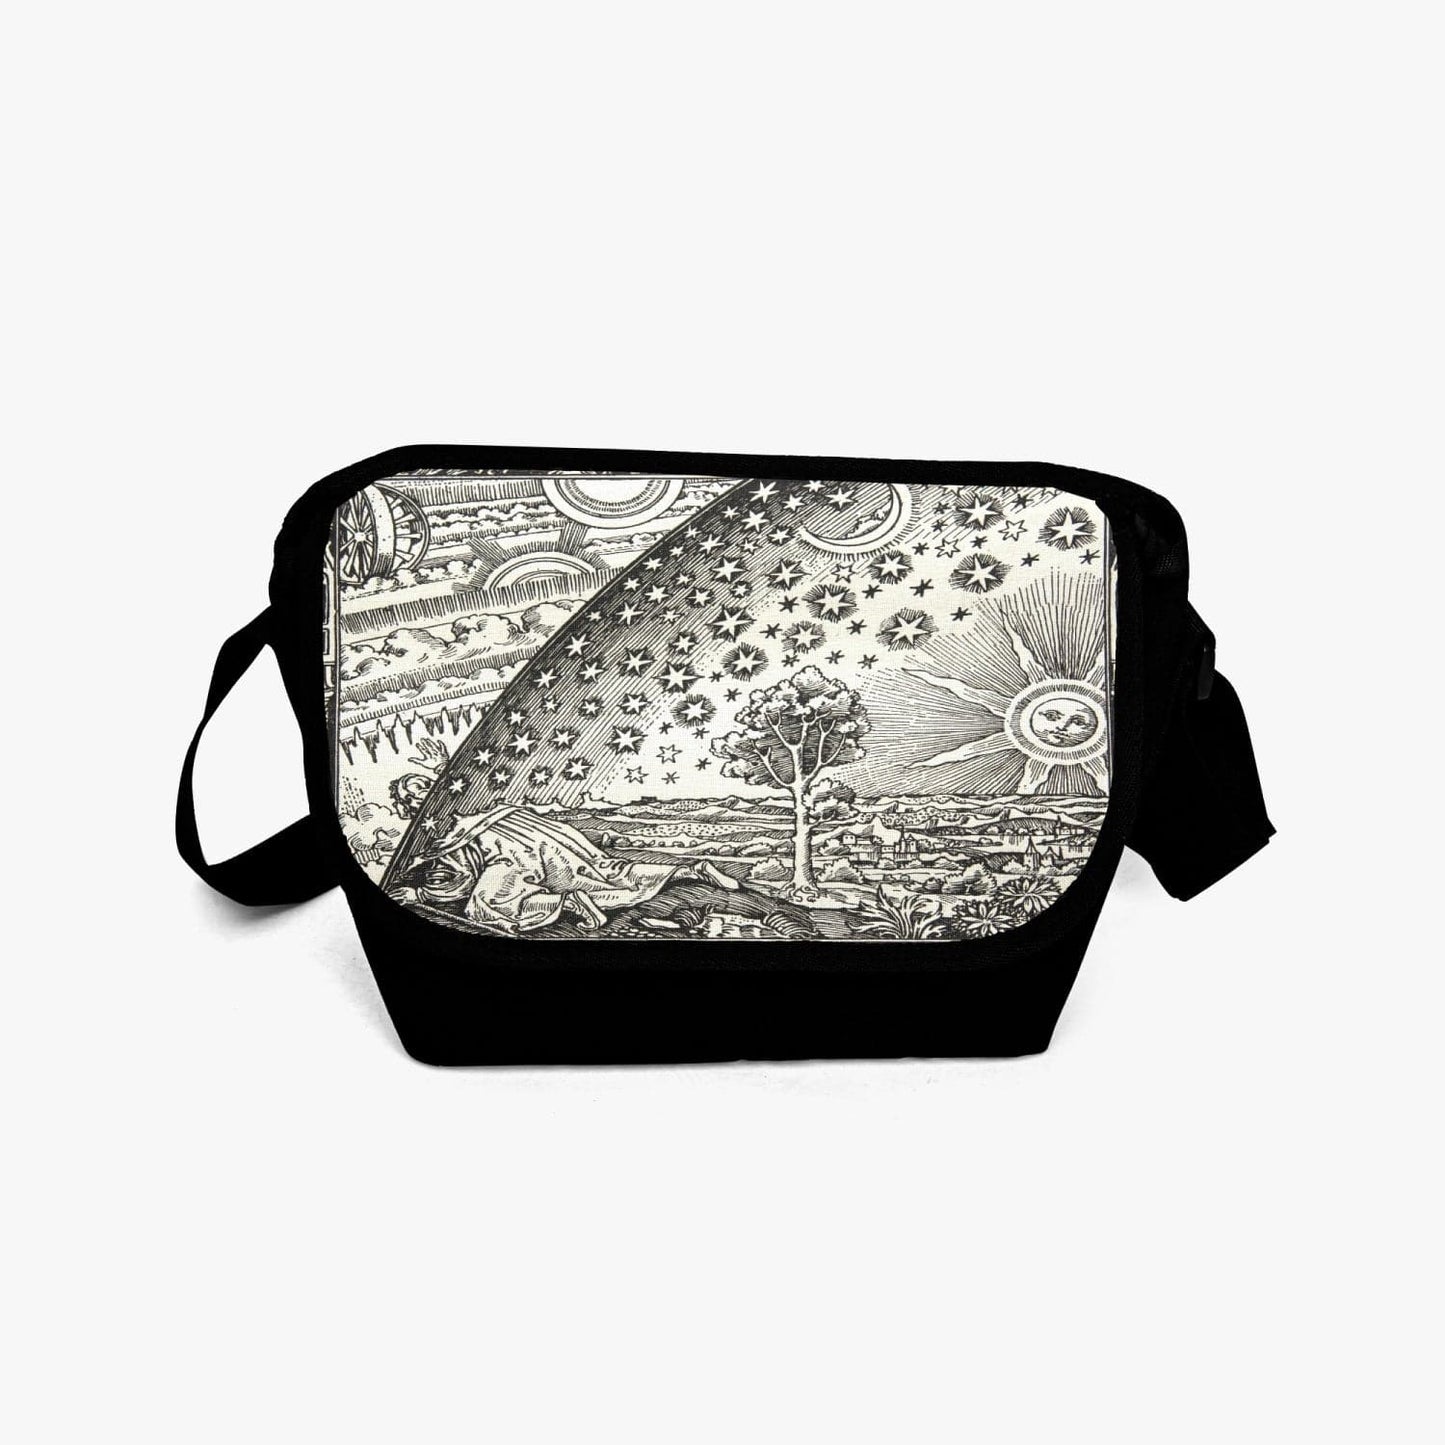 Flammarion engraving print in black and cream on a black canvas messenger bag at Gallery Serpentine